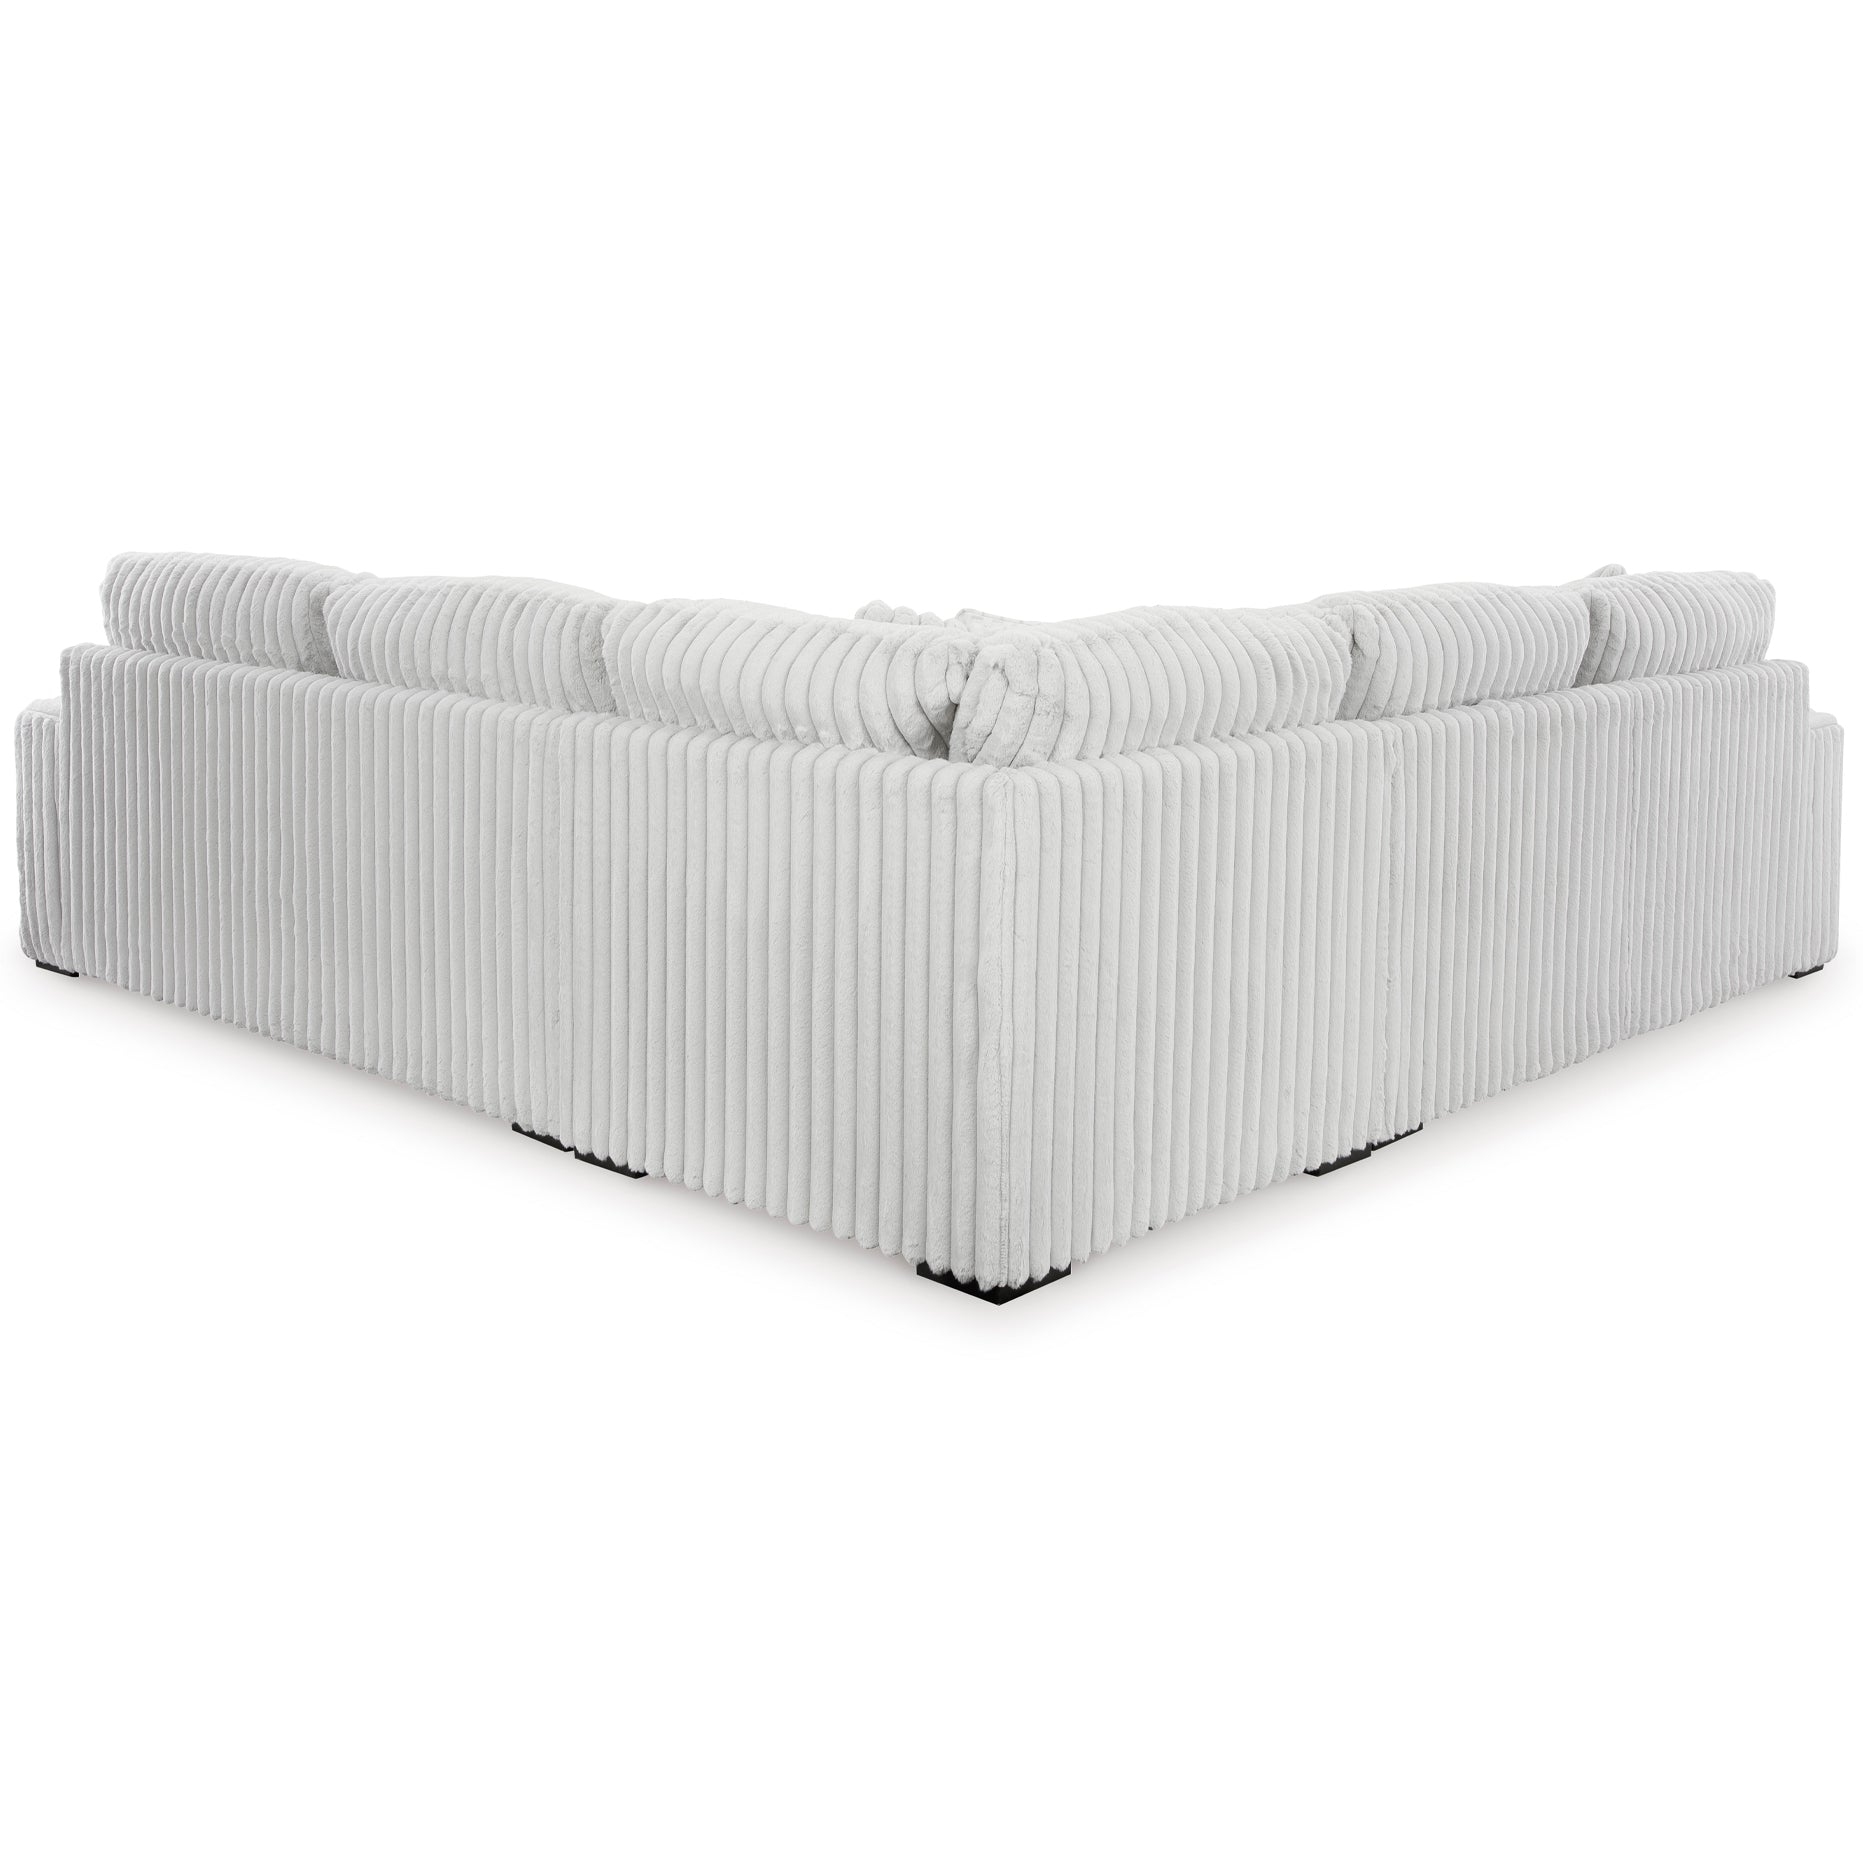 Stupendous 3-Piece Sectional, image of the back